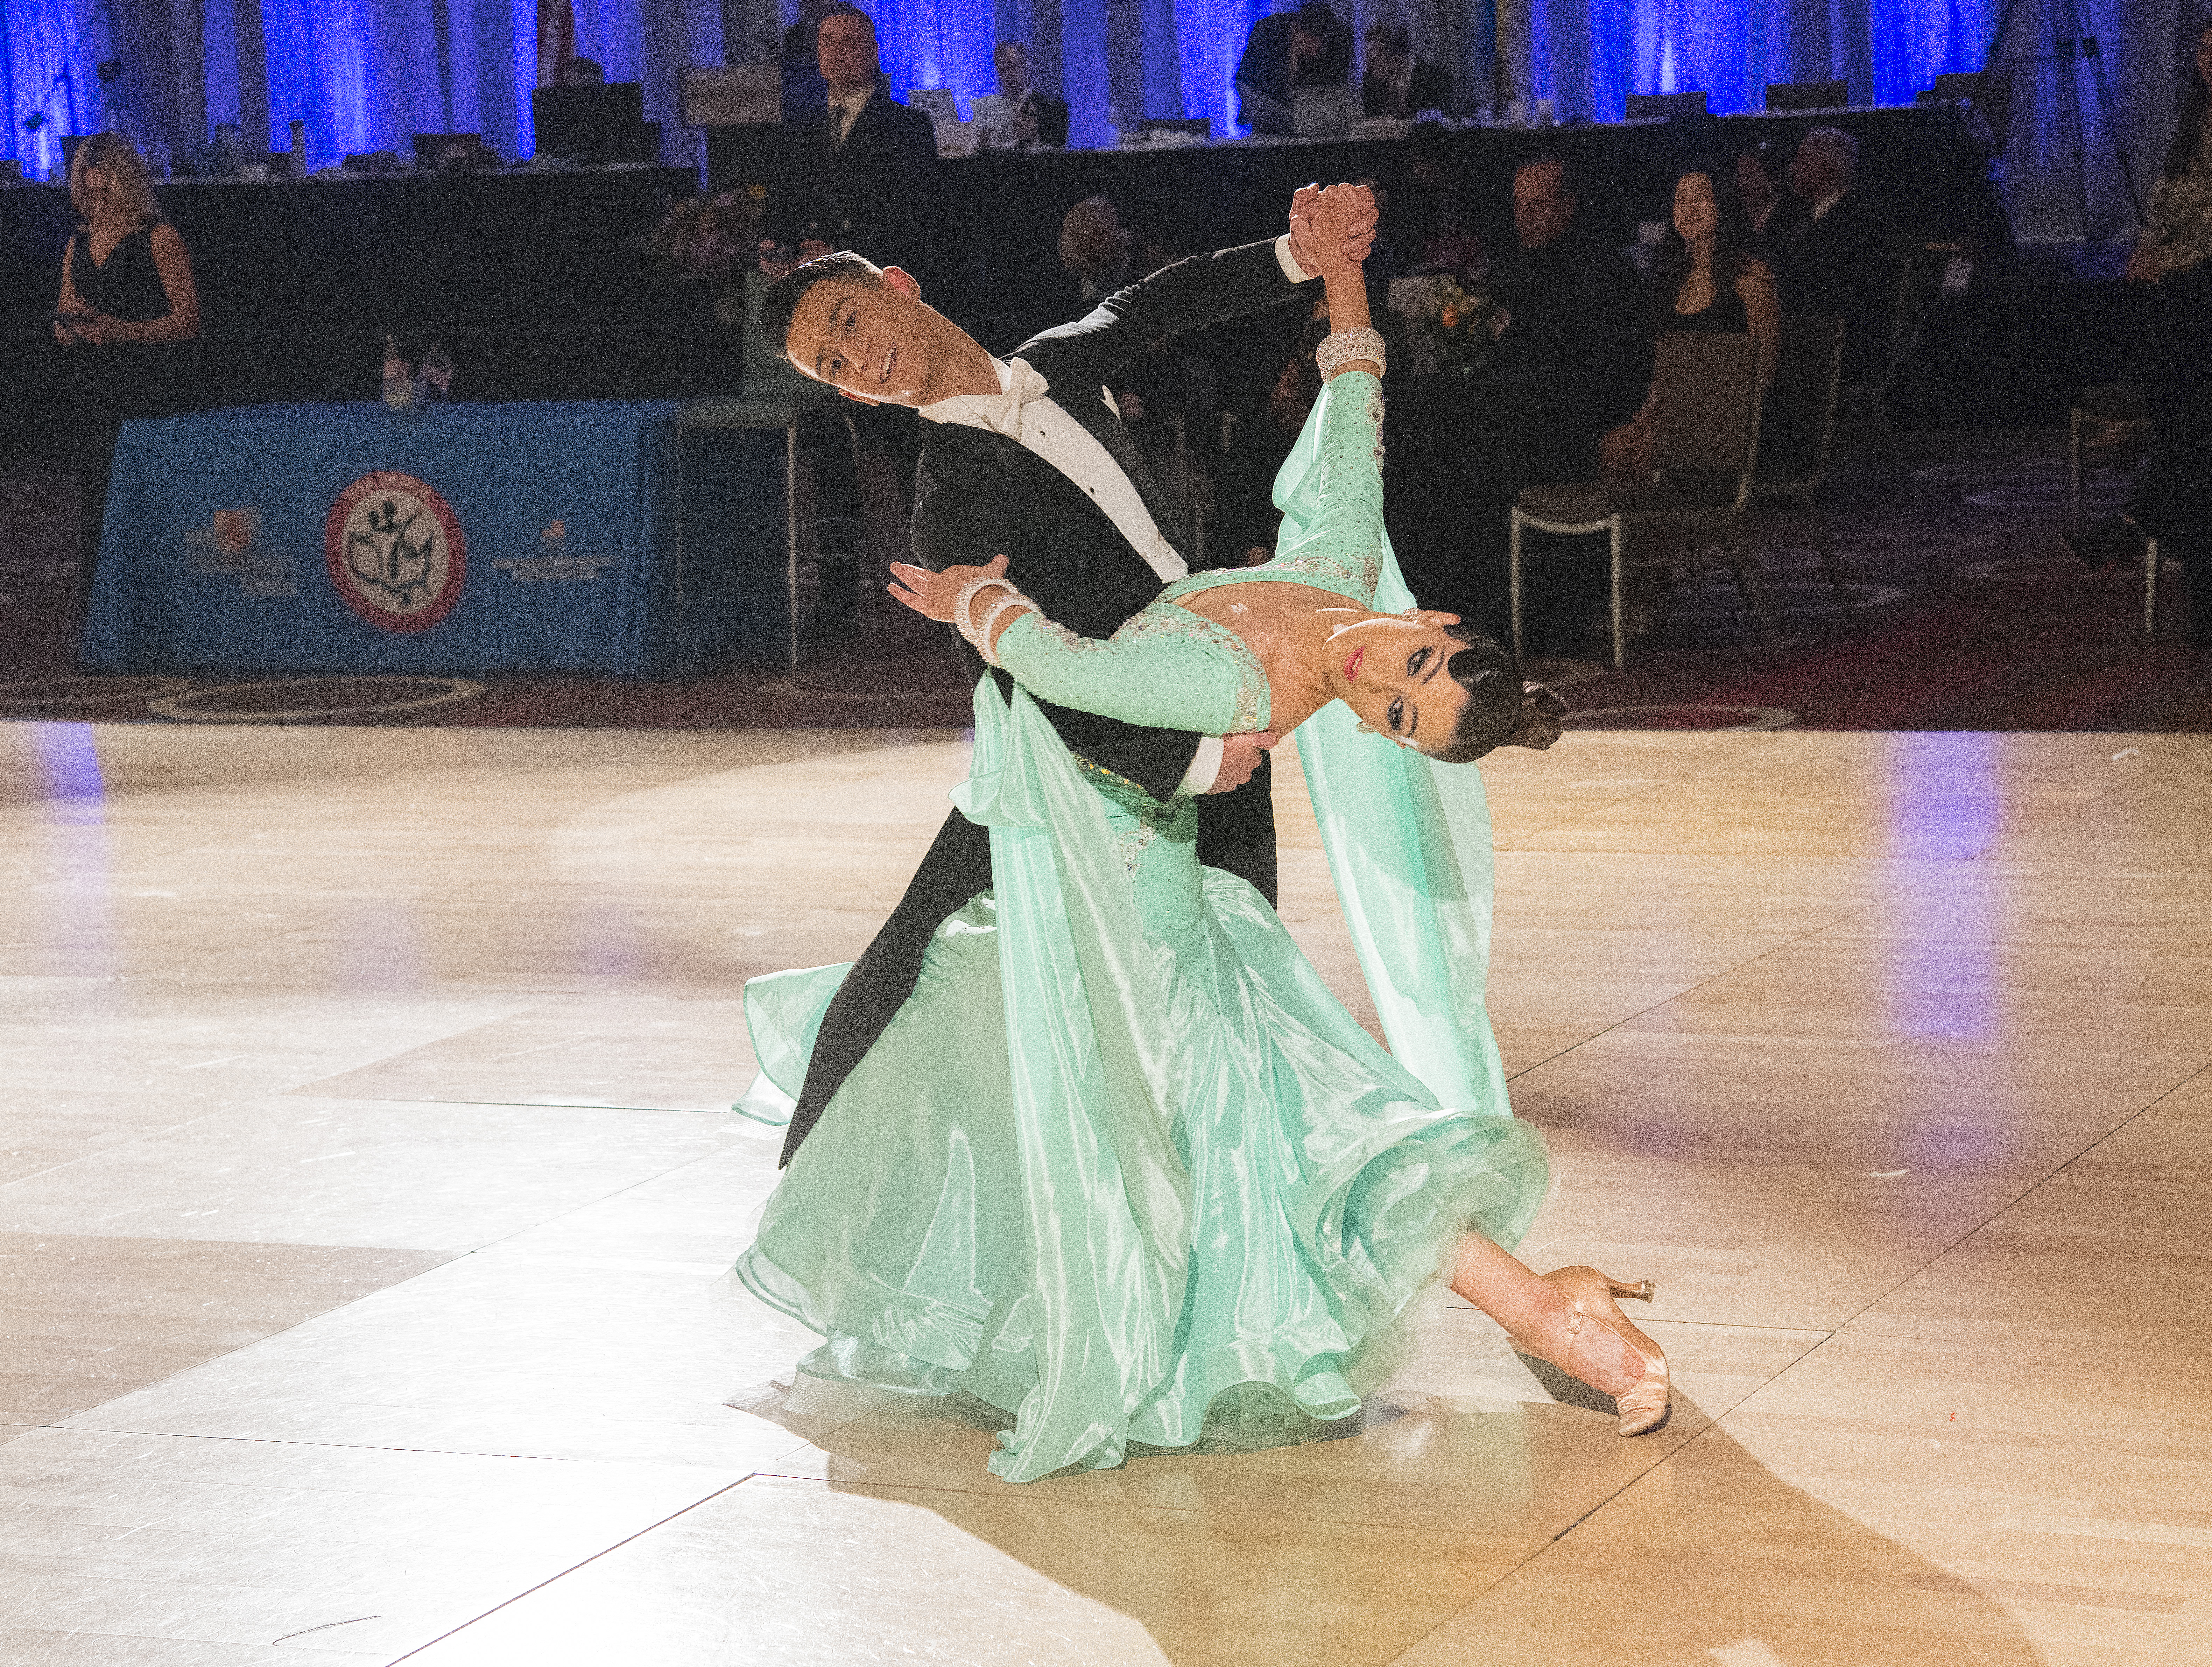 Christopher Affonso and Holly Hatleberg demonstrate a beautiful oversway in their Waltz. Christopher and Holly won Youth Championship Standard. Photo by Carson Zullinger.